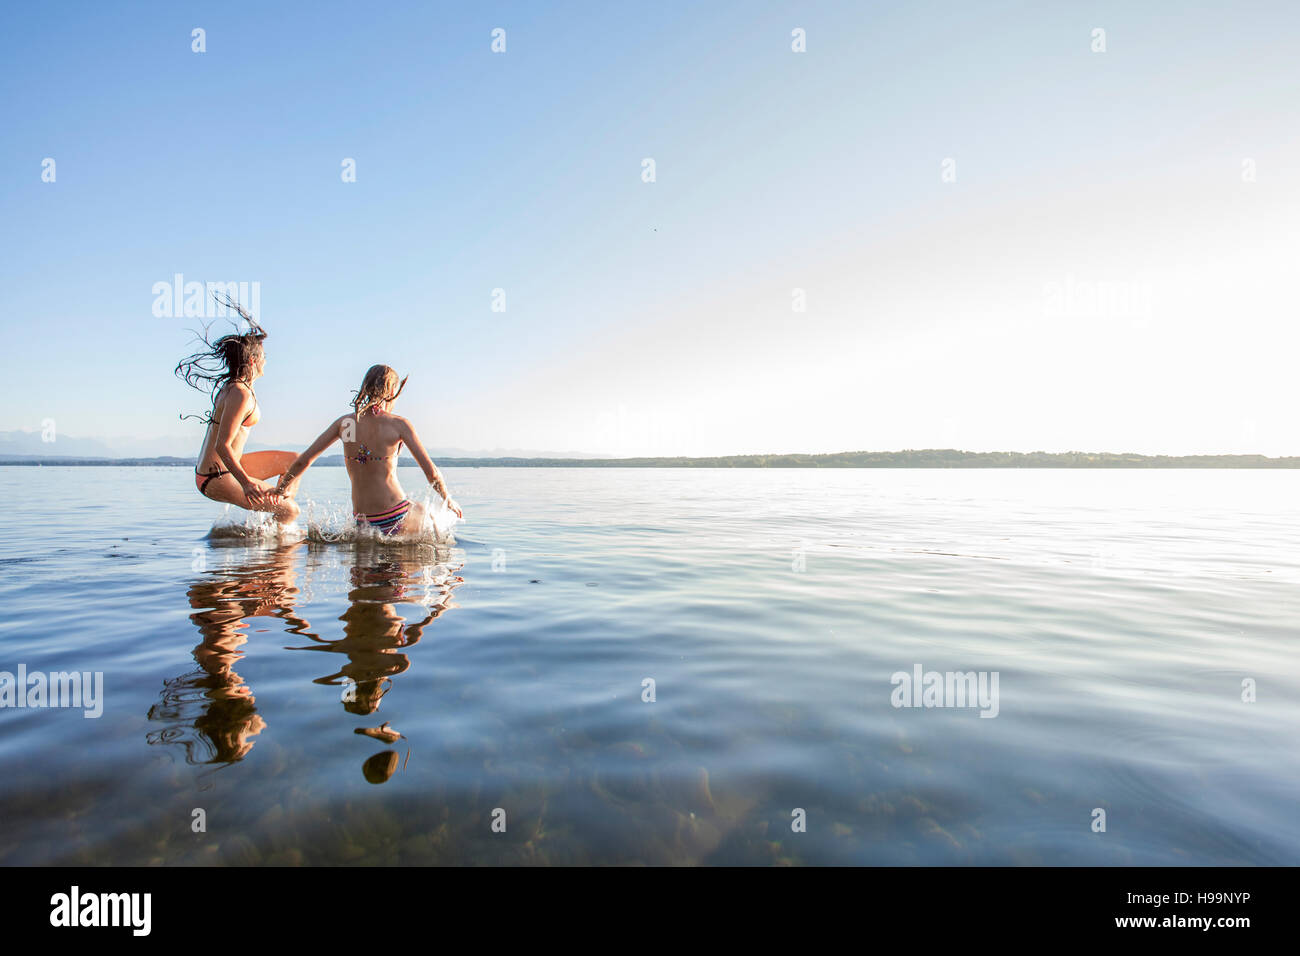 Two young women jumping into lake Stock Photo